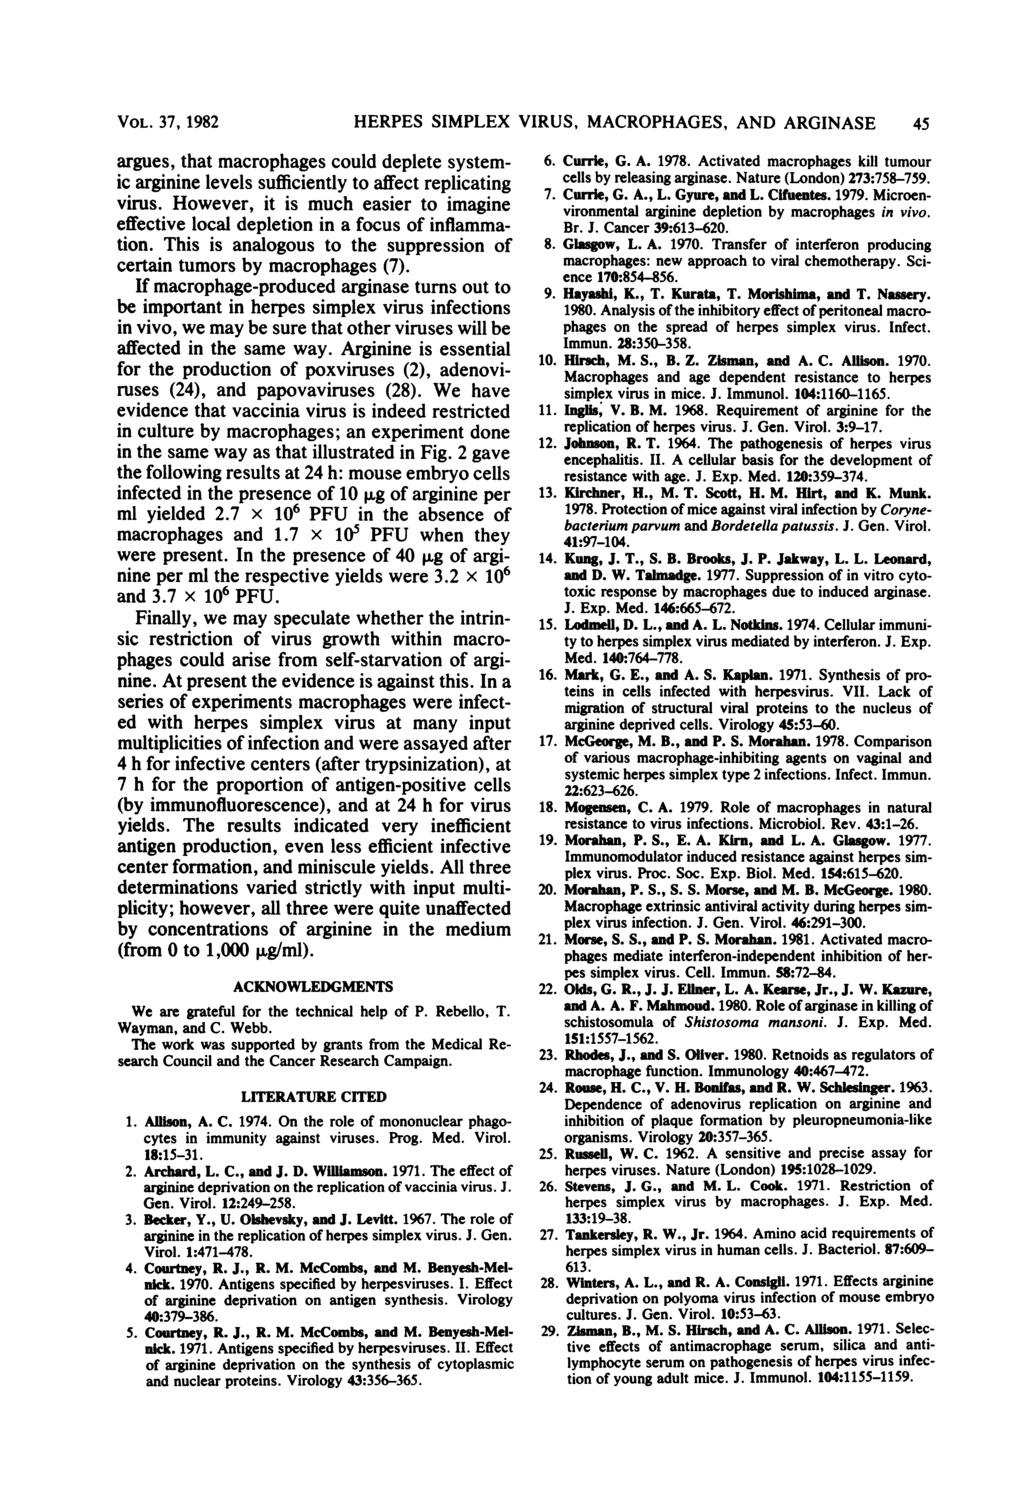 VOL. 37, 1982 argues, that macrophages could deplete systemic arginine levels sufficiently to affect replicating virus.